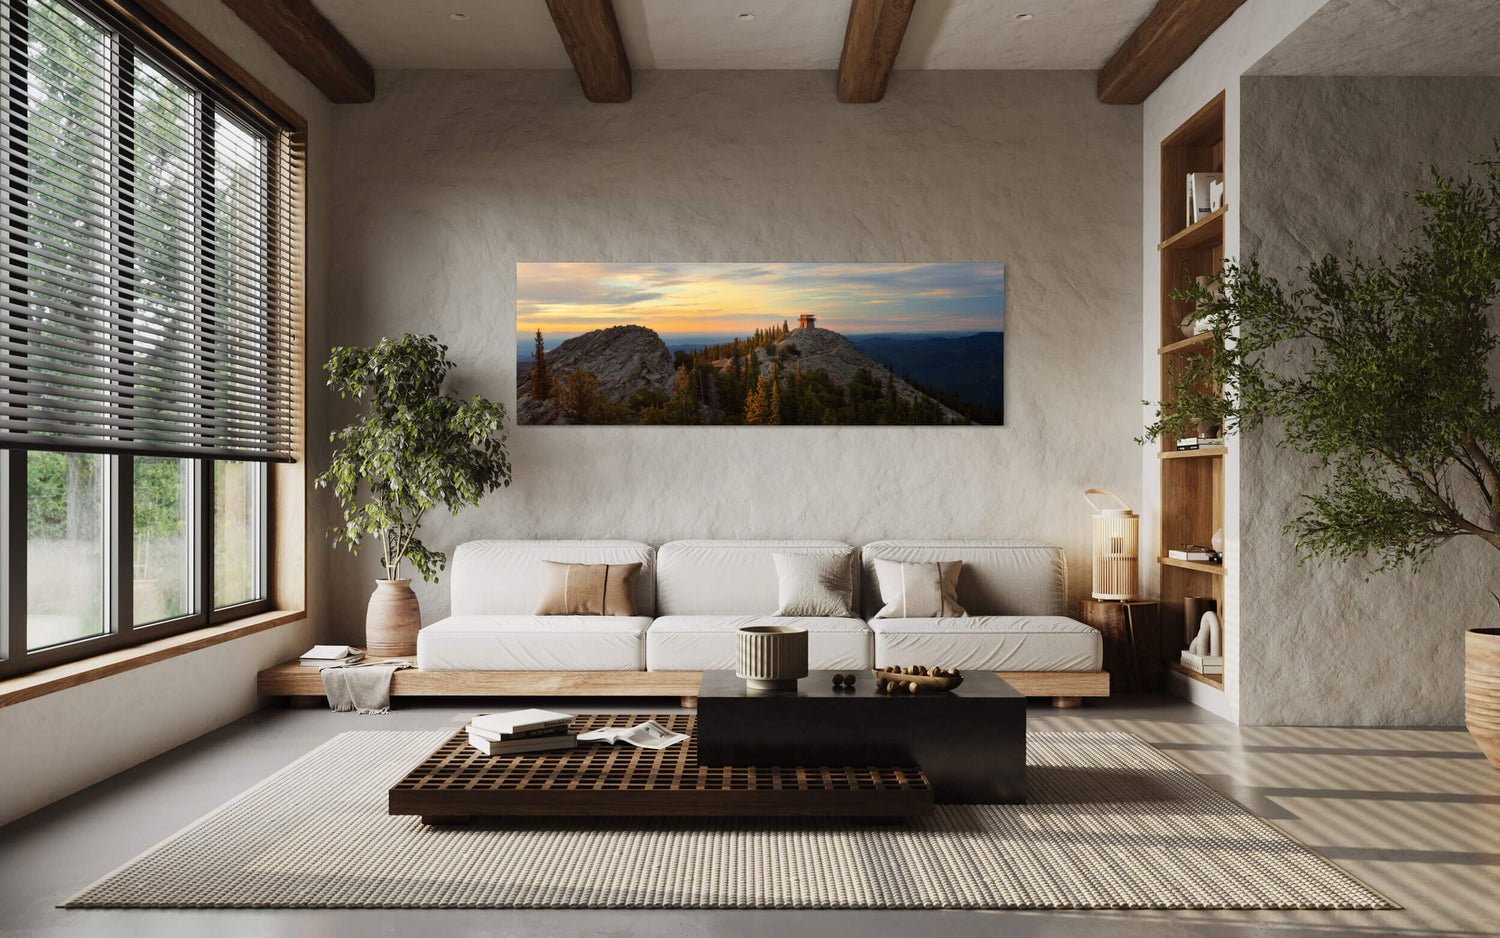 A piece of Denver art showing a fire lookout picture hangs in a living room.